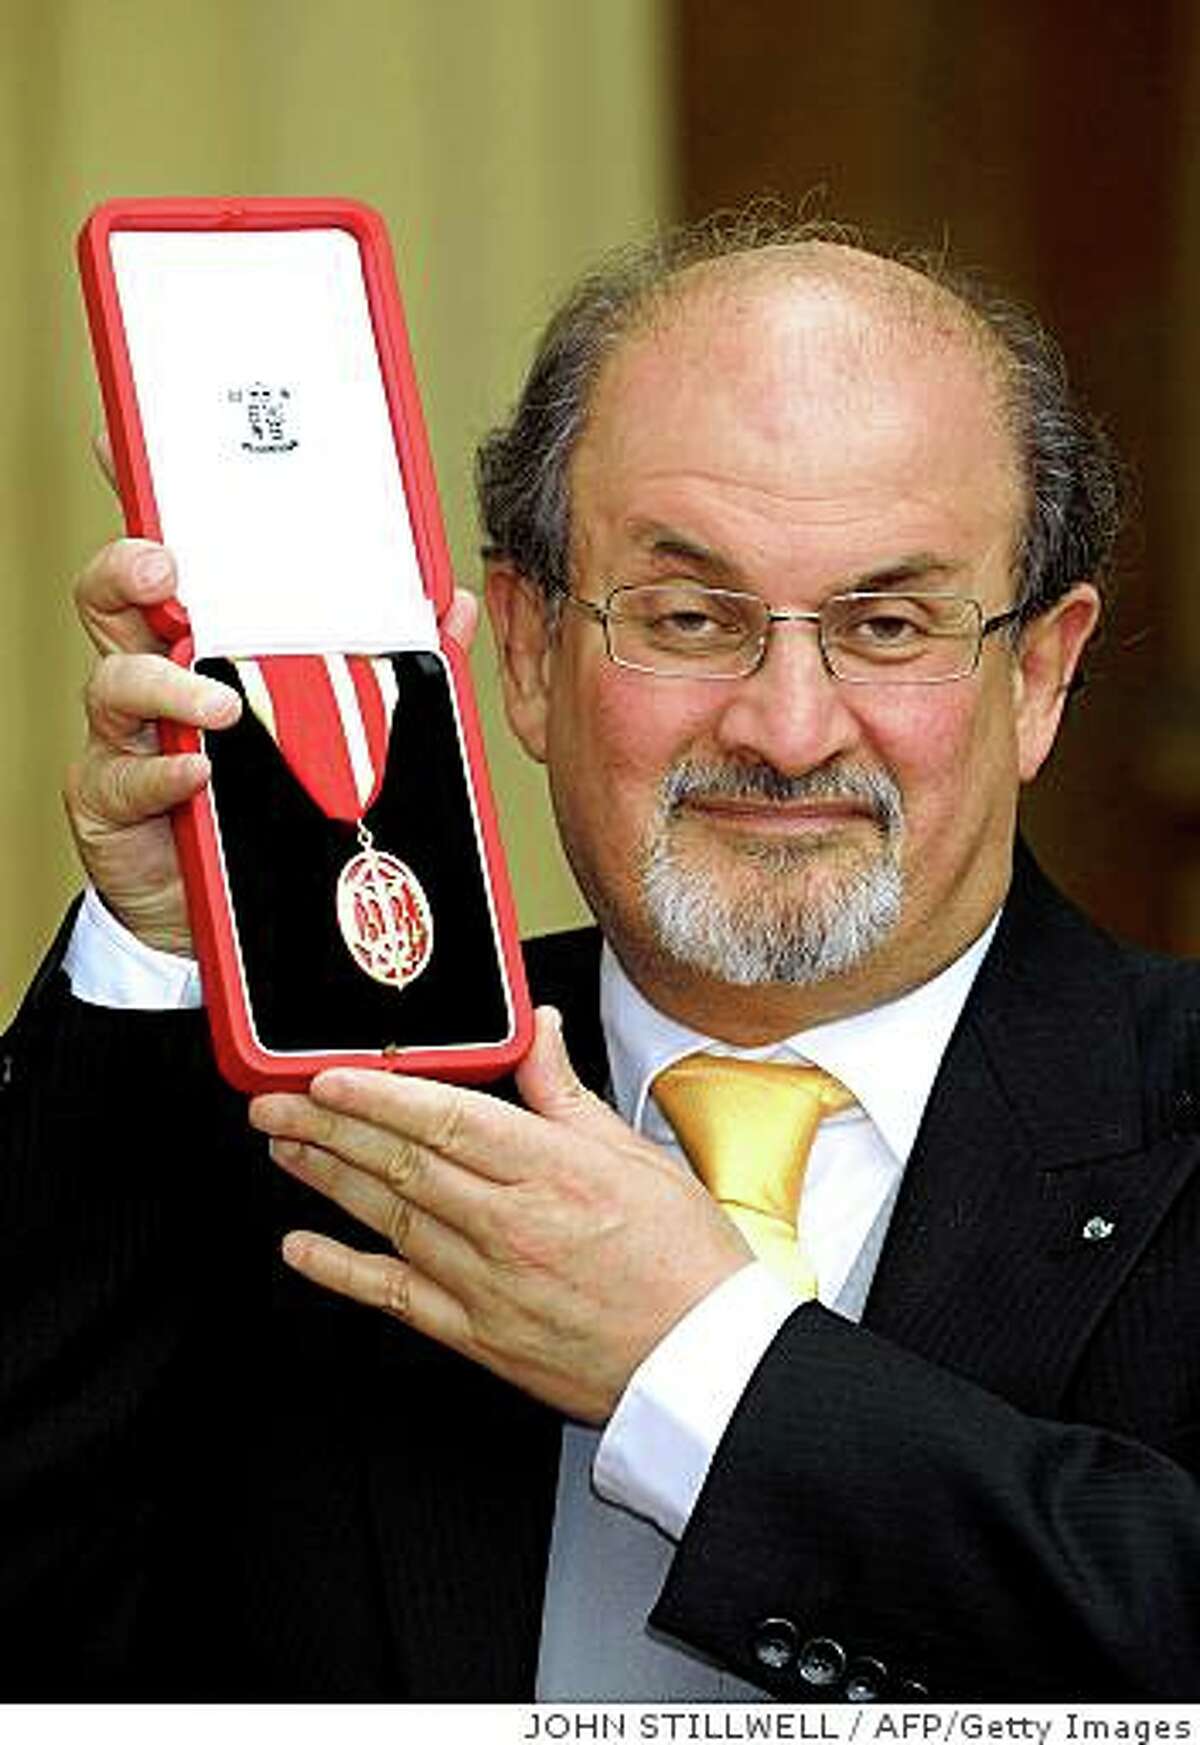 British author Sir Salman Rushdie poses for photographs after receiving his knighthood from Britain's Queen Elizabeth II at Buckingham Palace, in London, on June 25, 2008. Queen Elizabeth II on Wednesday gave the British author Salman Rushdie his controversial knighthood, which caused protests by Muslims around the world when it was announced last year. Rushdie, 61, was knighted for his services to literature. AFP PHOTO/John Stillwell/POOL (Photo credit should read JOHN STILLWELL/AFP/Getty Images)